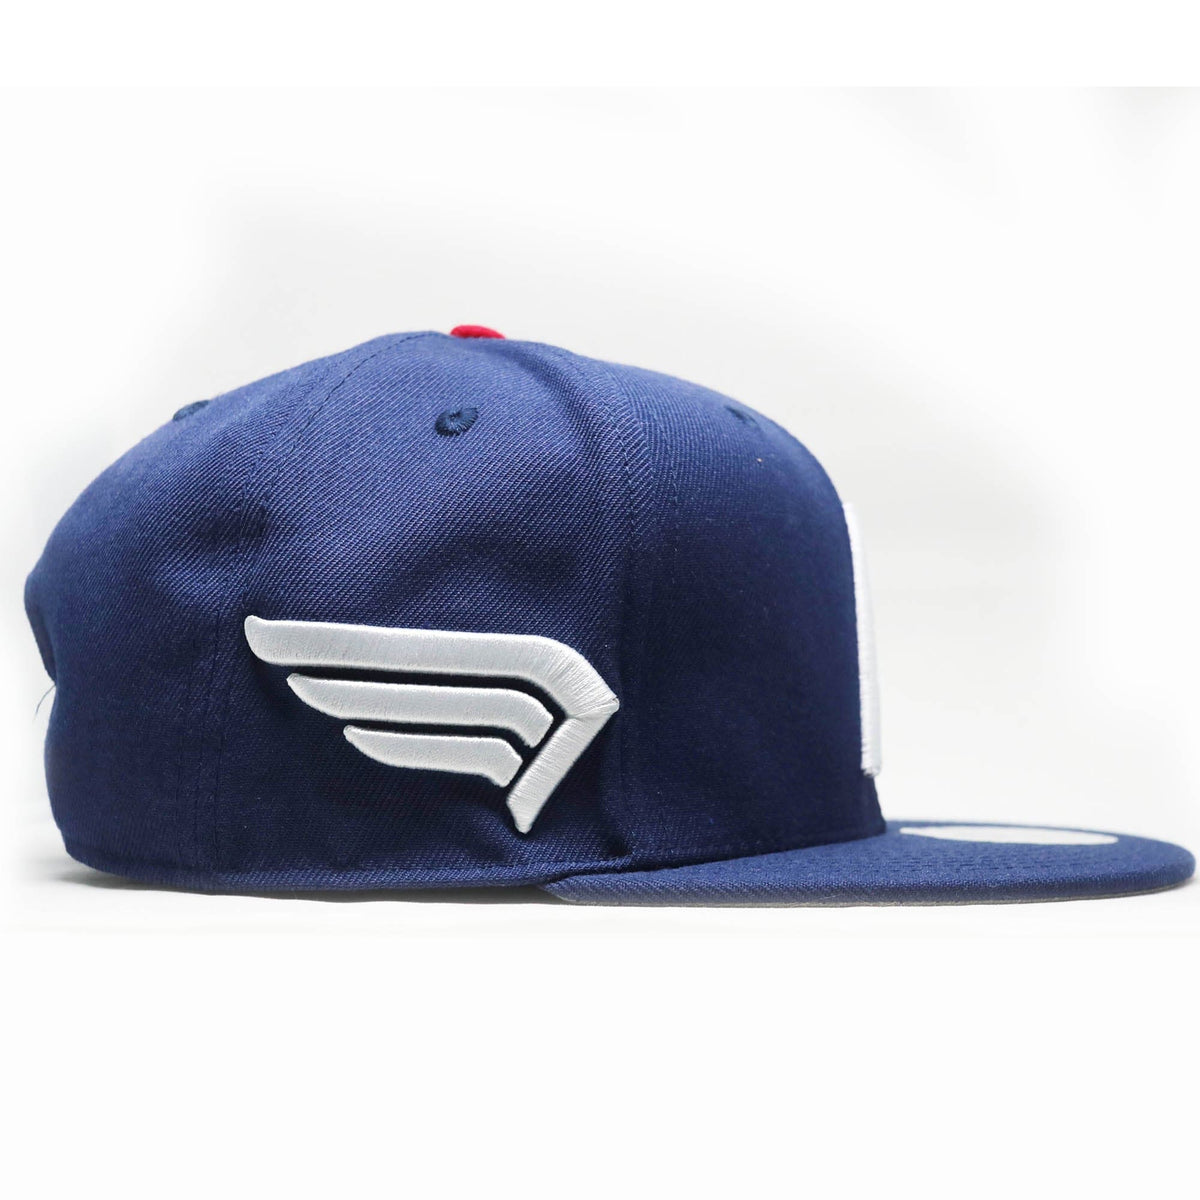 Super Soldier (Imperfection Discounted) - Snapback